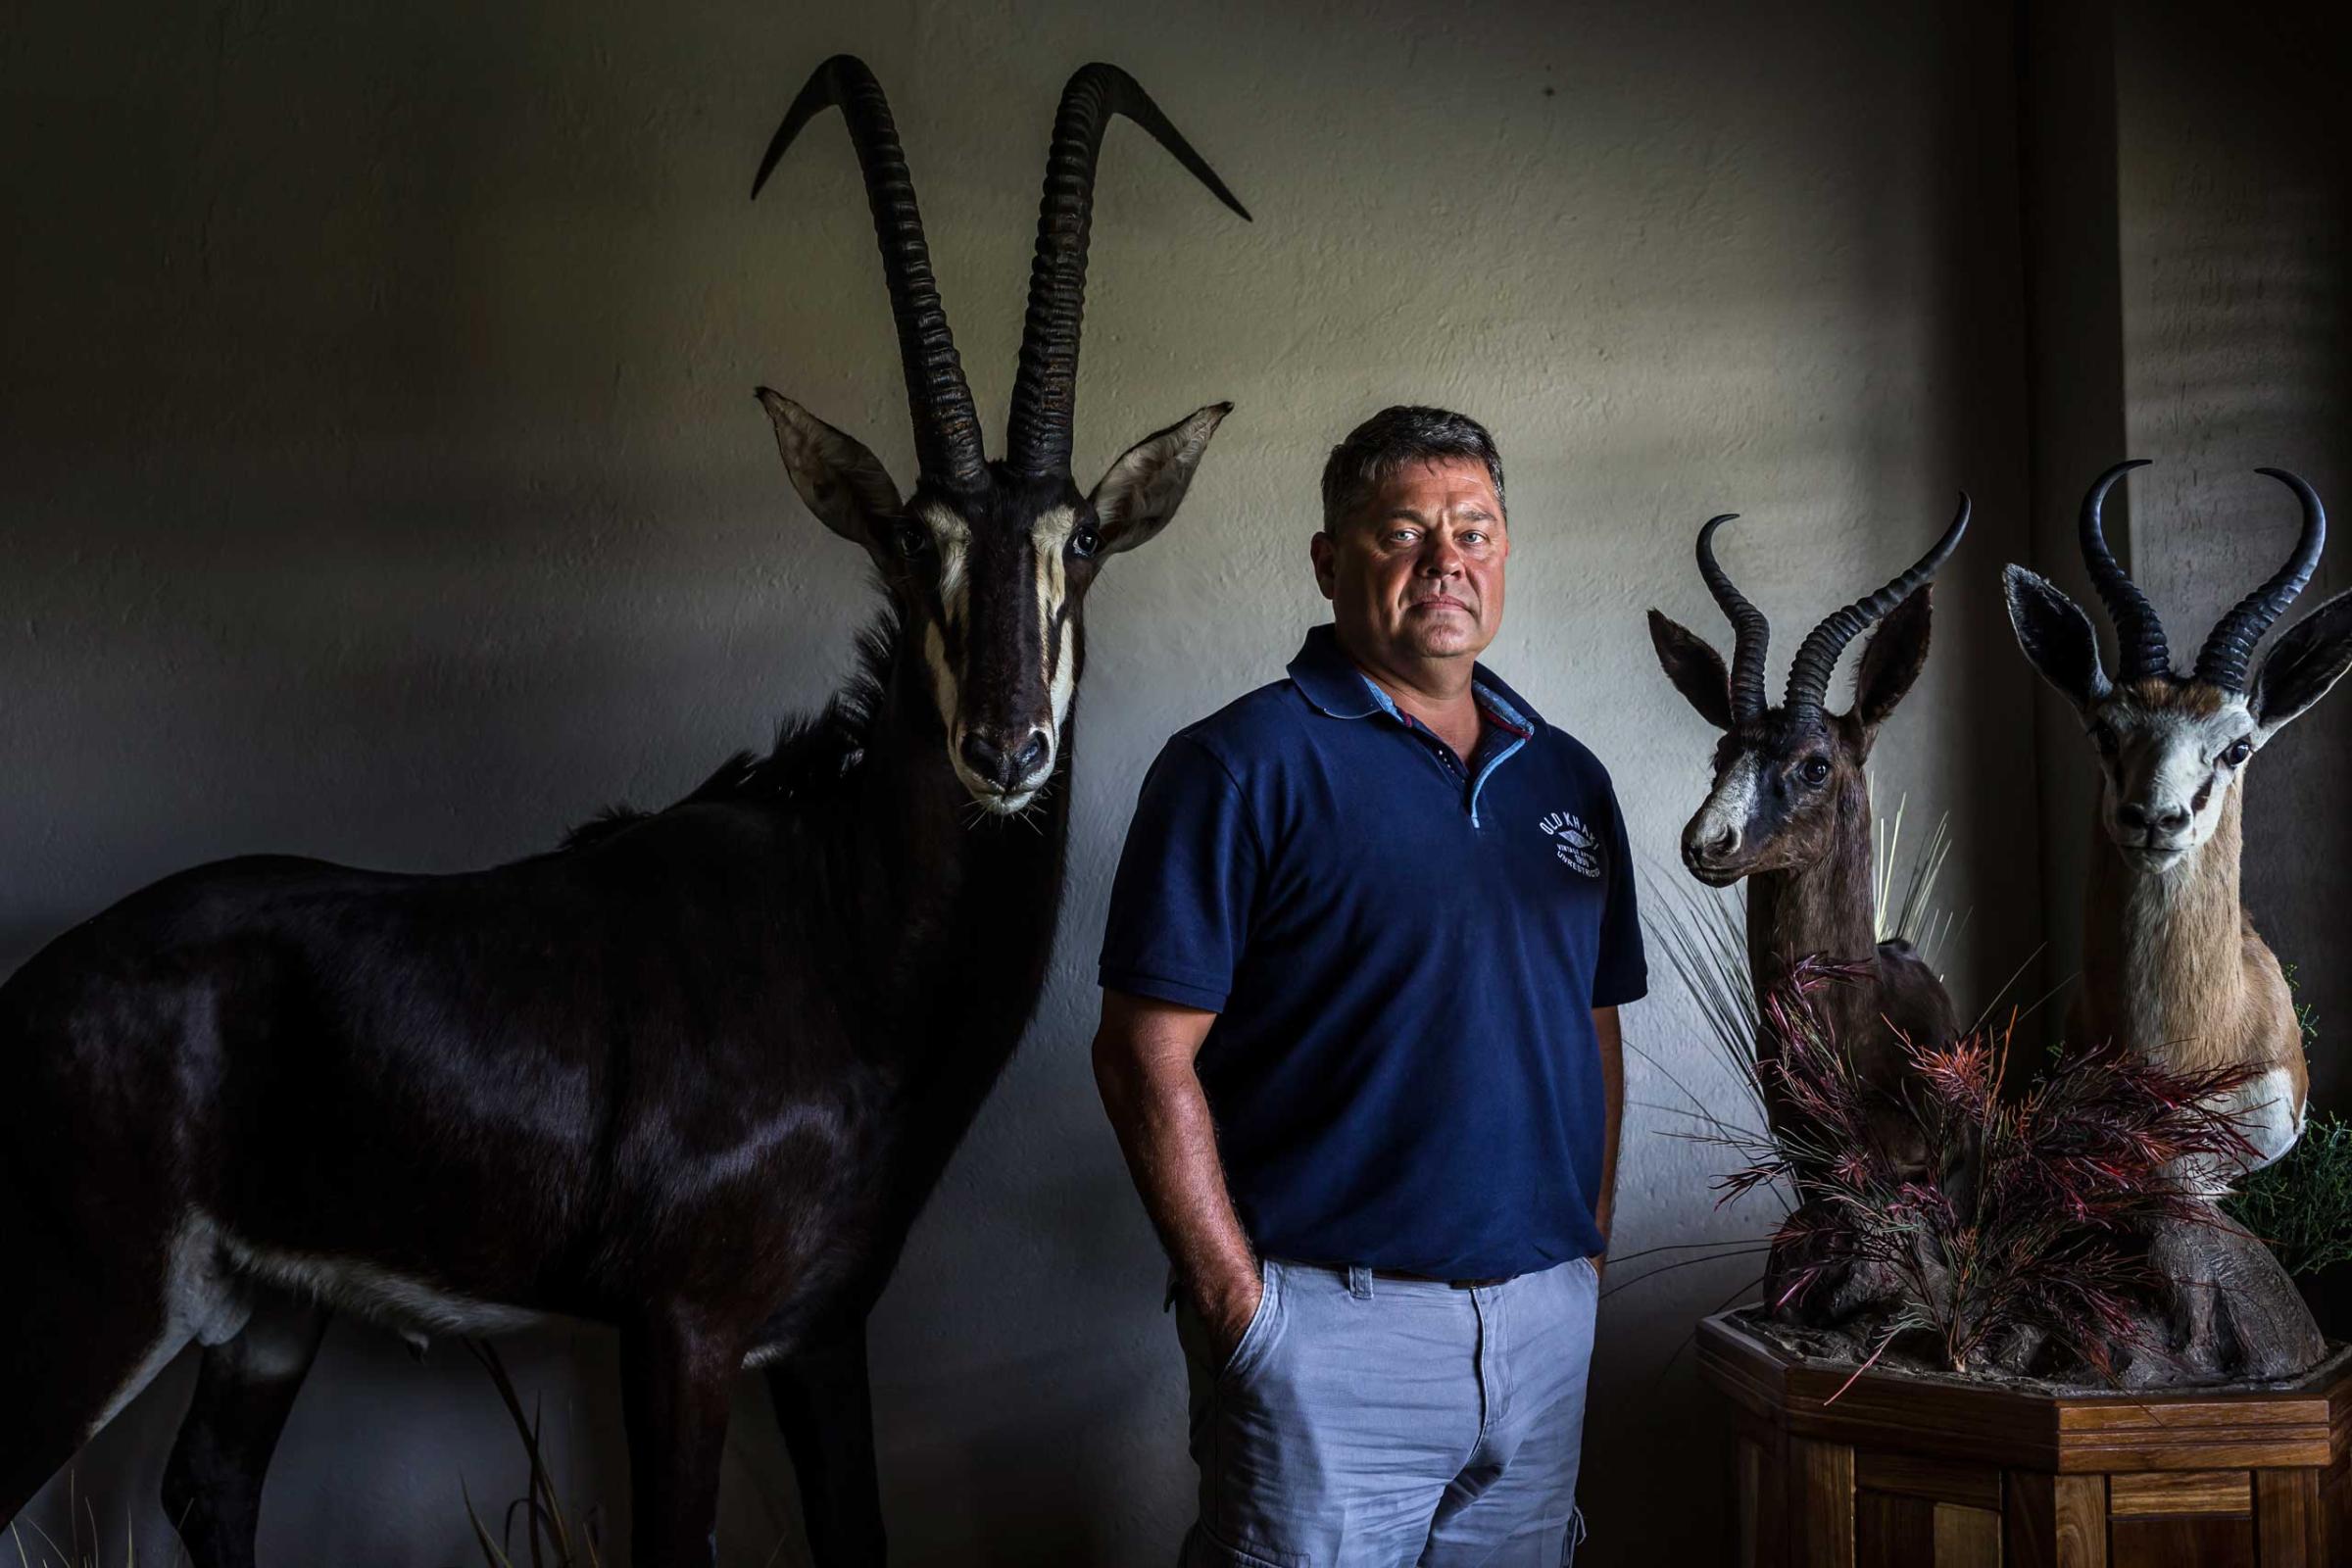 POLOKWANE, SOUTH AFRICA: Dawie Groenewalt, South Africa's alleged Rhino horn kingpin and the subject of a 6 year old court case involving multiple charges related to illegal Rhino horn theft and money laundering amongst other charges. He is seen on his game farm in Polokwane where he breeds high-end game for sale and hunting purposes. Groenewalt has also been charged and arrested in the USA on animal trophy charges. Groenwalt denies any wrong doing. He is one of the driving forces behind the court effort to legalize the rhino trade in South Africa. If horn was to be legalized, most of his charges would disapear and he would be in a prime position as a breeder to make significant money from rhino horn. He owns two large properties for breeding and hunting purposes and he hosts many international hunters on those properties. He states freely that he believes South Africa's recent decision not to apply to CITES for the legalization of trade in horn is a death knell for rhino in the wild in South Africa. He further alleges that Kruger National Park, the largest repository for Rhino in the world, vastly over-reports their rhino numbers. Kruger is Groenwalt's largest source for Rhino, he has won repeated tenders for rhino from the park. He is also connected to John Hume, the worlds largest Rhino breeder and one of three partners in Groenwalt's legal efforts to legalize Rhino horn for export to Asia. He claims to receive multiple calls from both Chinese and Vietnamese buyers on a monthly basis, all asking for horn. He speaks of taking representatives from both nations to John Hume's place to show them Hume's cache of horns from dehorning. This cache is allegedly worth in excess of 300 000 000 South African Rand, around 20-40 million dollars. He argues in favour of breeding and dehorning for export, stating that John Hume alone can supply over 1000 kilograms of horn every year.